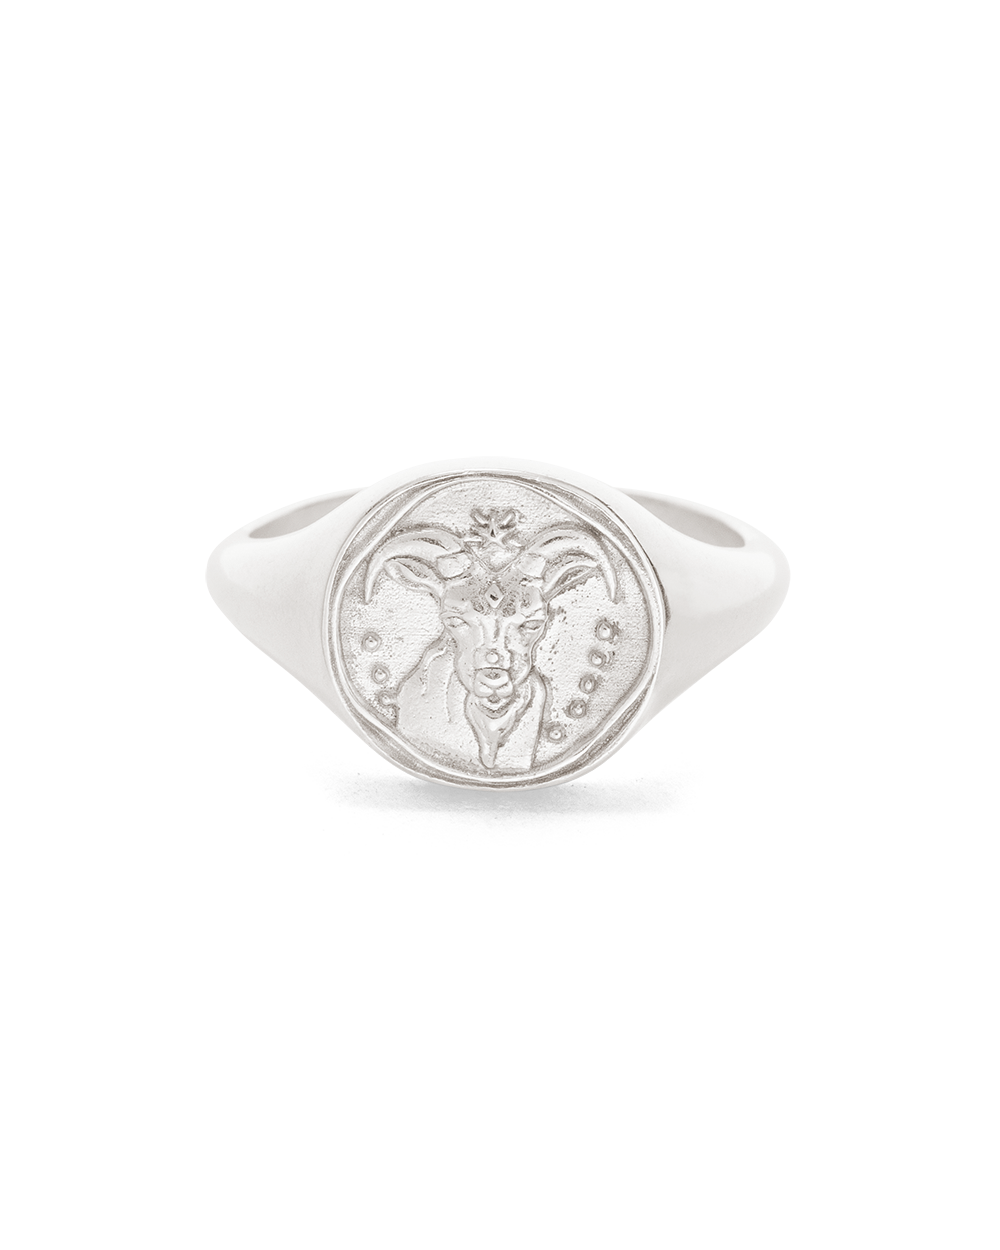 CAPRICORN SIGNET RING (STERLING SILVER) - IMAGE 4